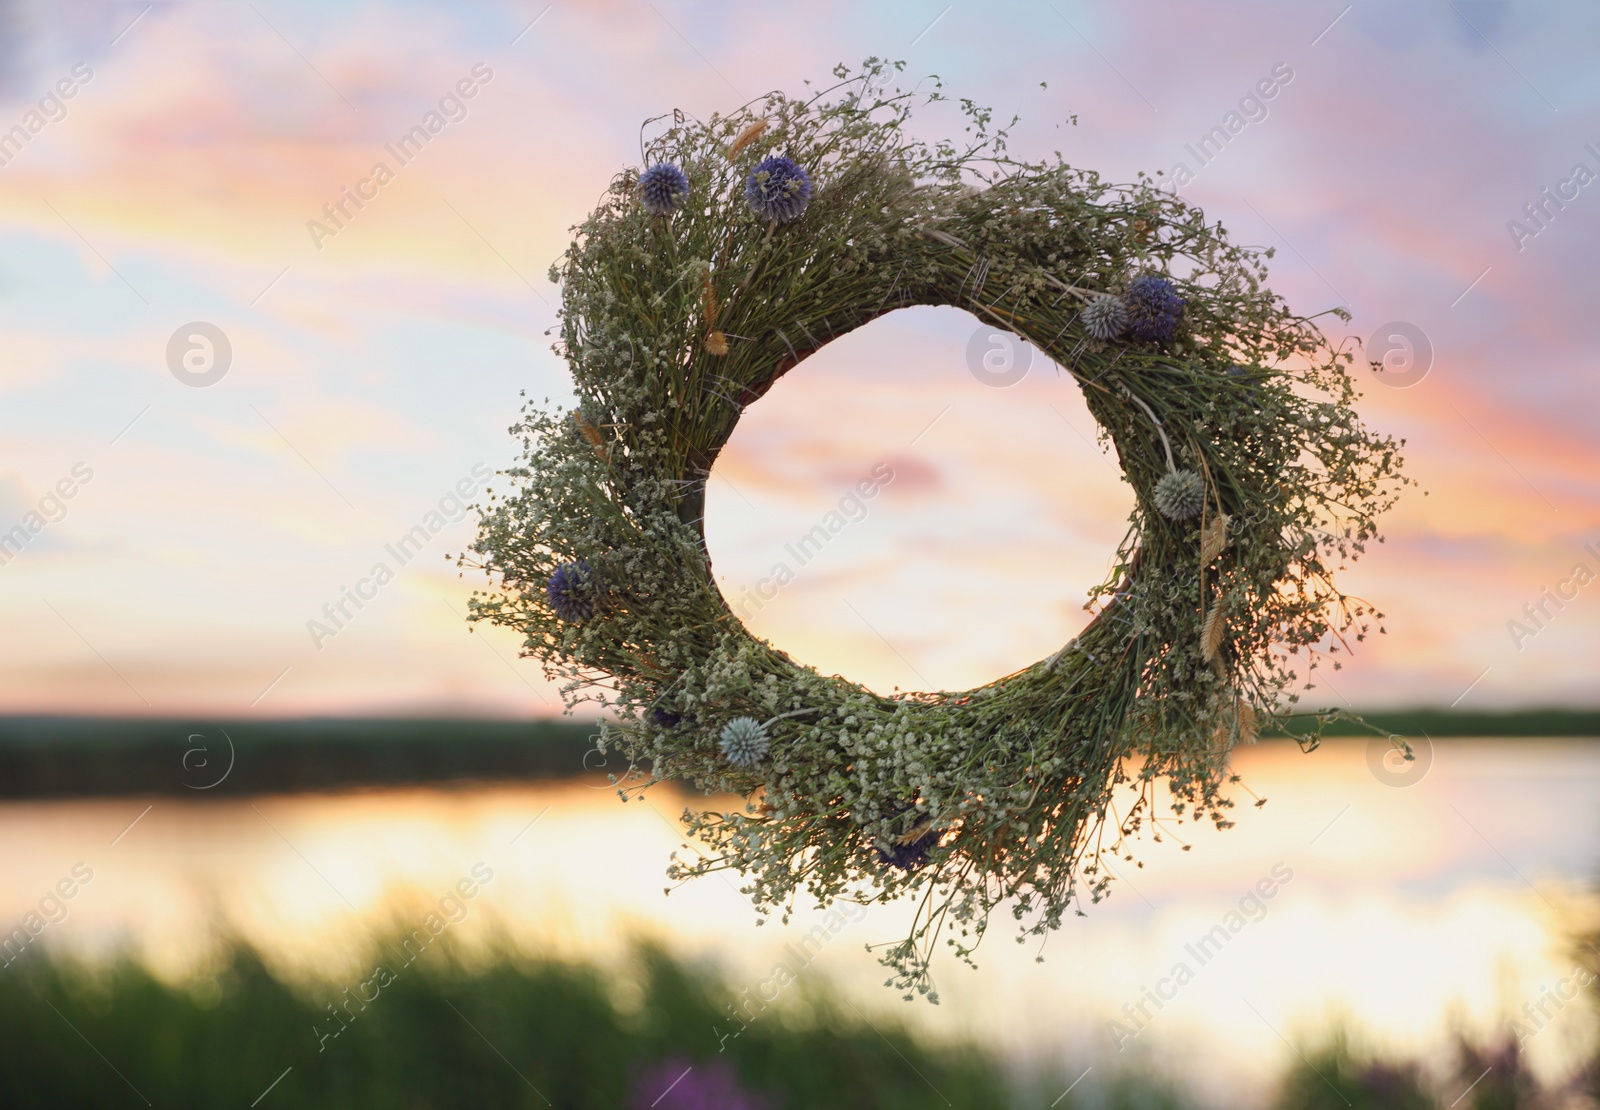 Photo of Wreath made of beautiful flowers hanging outdoors